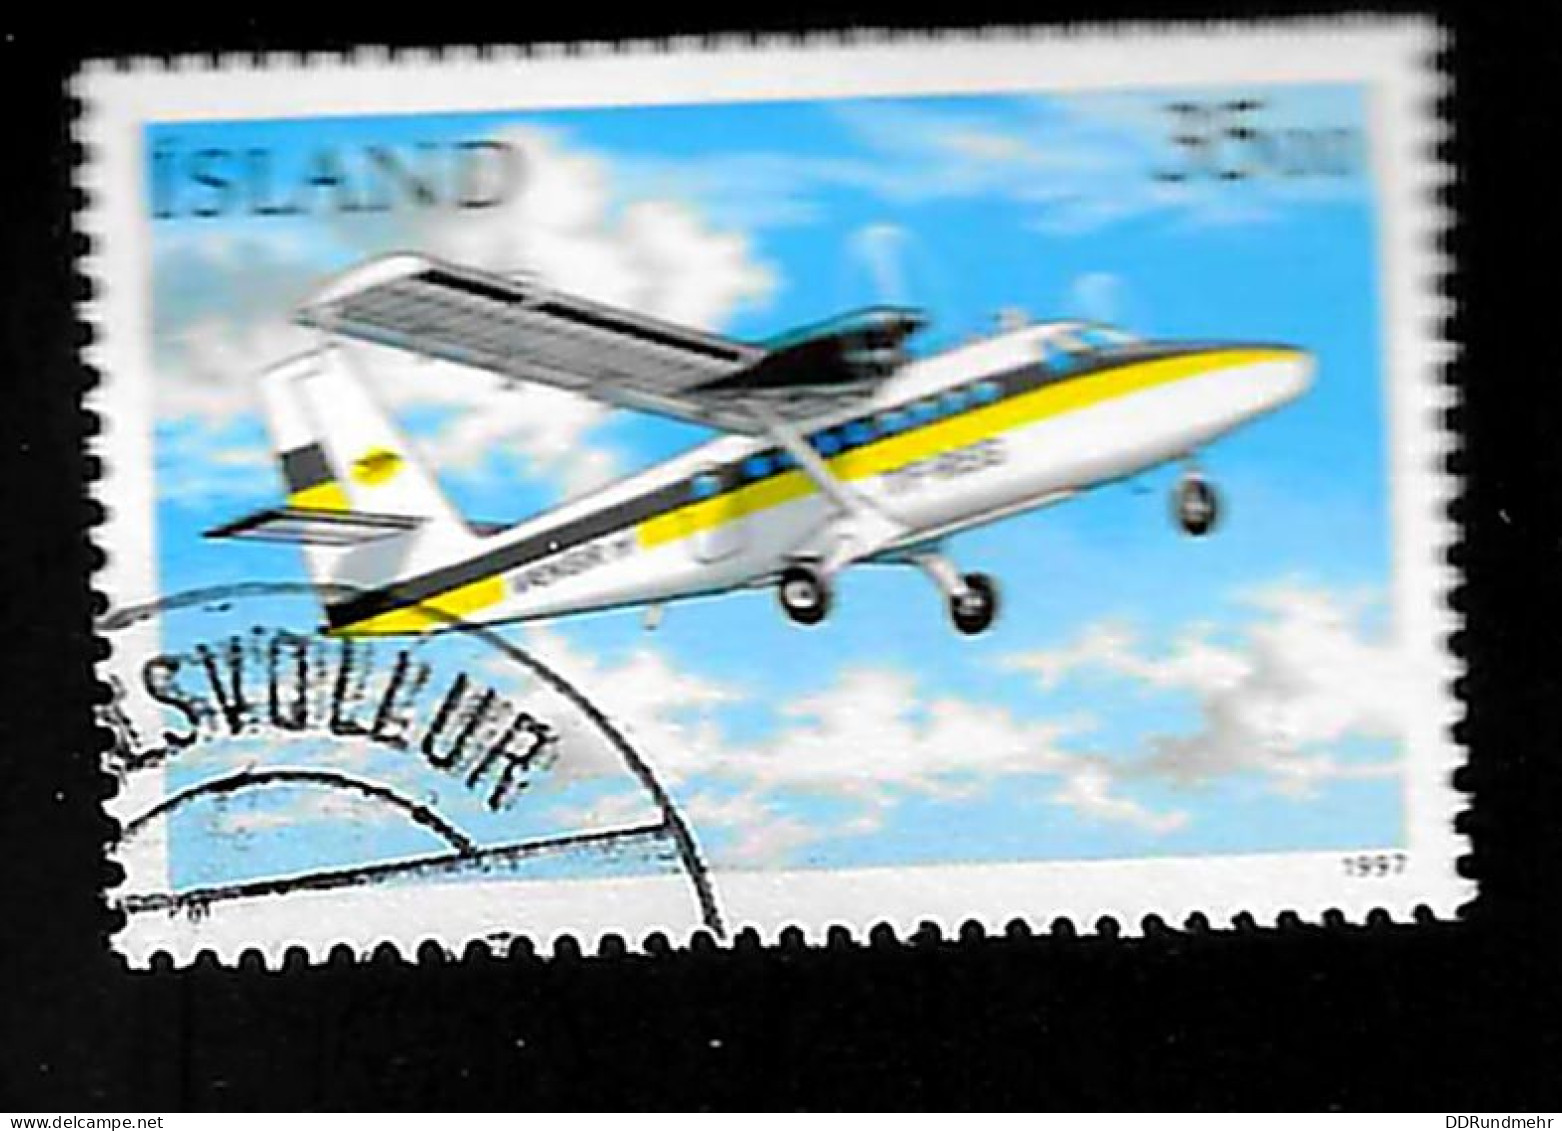 1997 Postal Aircrafts Michel IS 869 Stamp Number IS 841 Stanley Gibbons IS 882 AFA IS 854 Used - Oblitérés